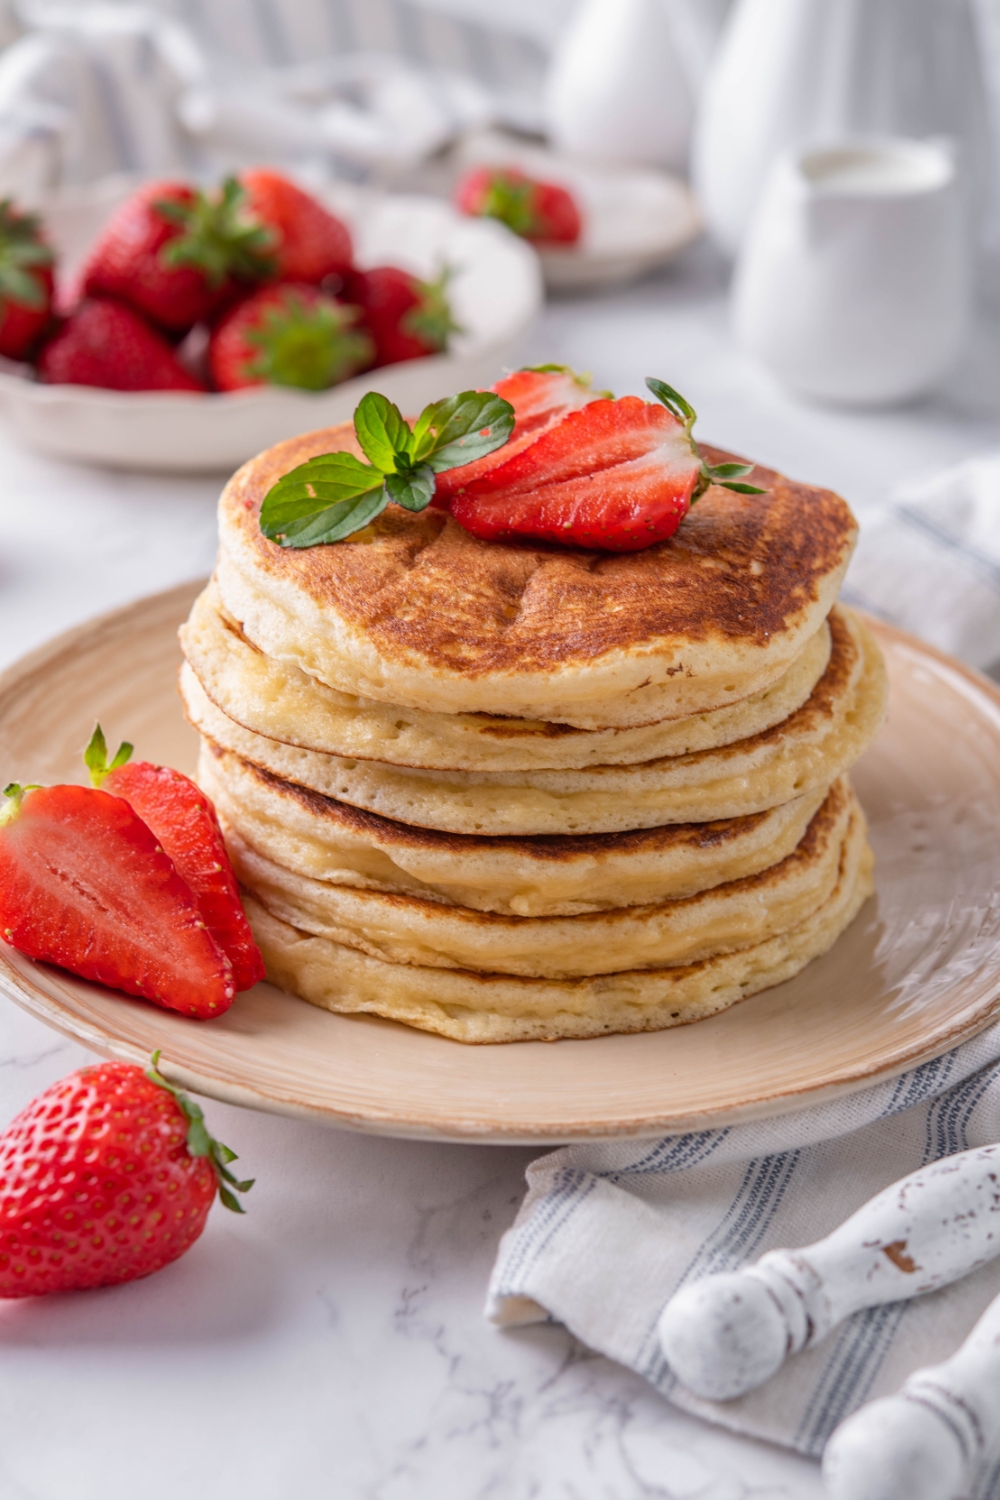 A plate with a stack of pancakes topped with sliced strawberries and a garnish of mint.